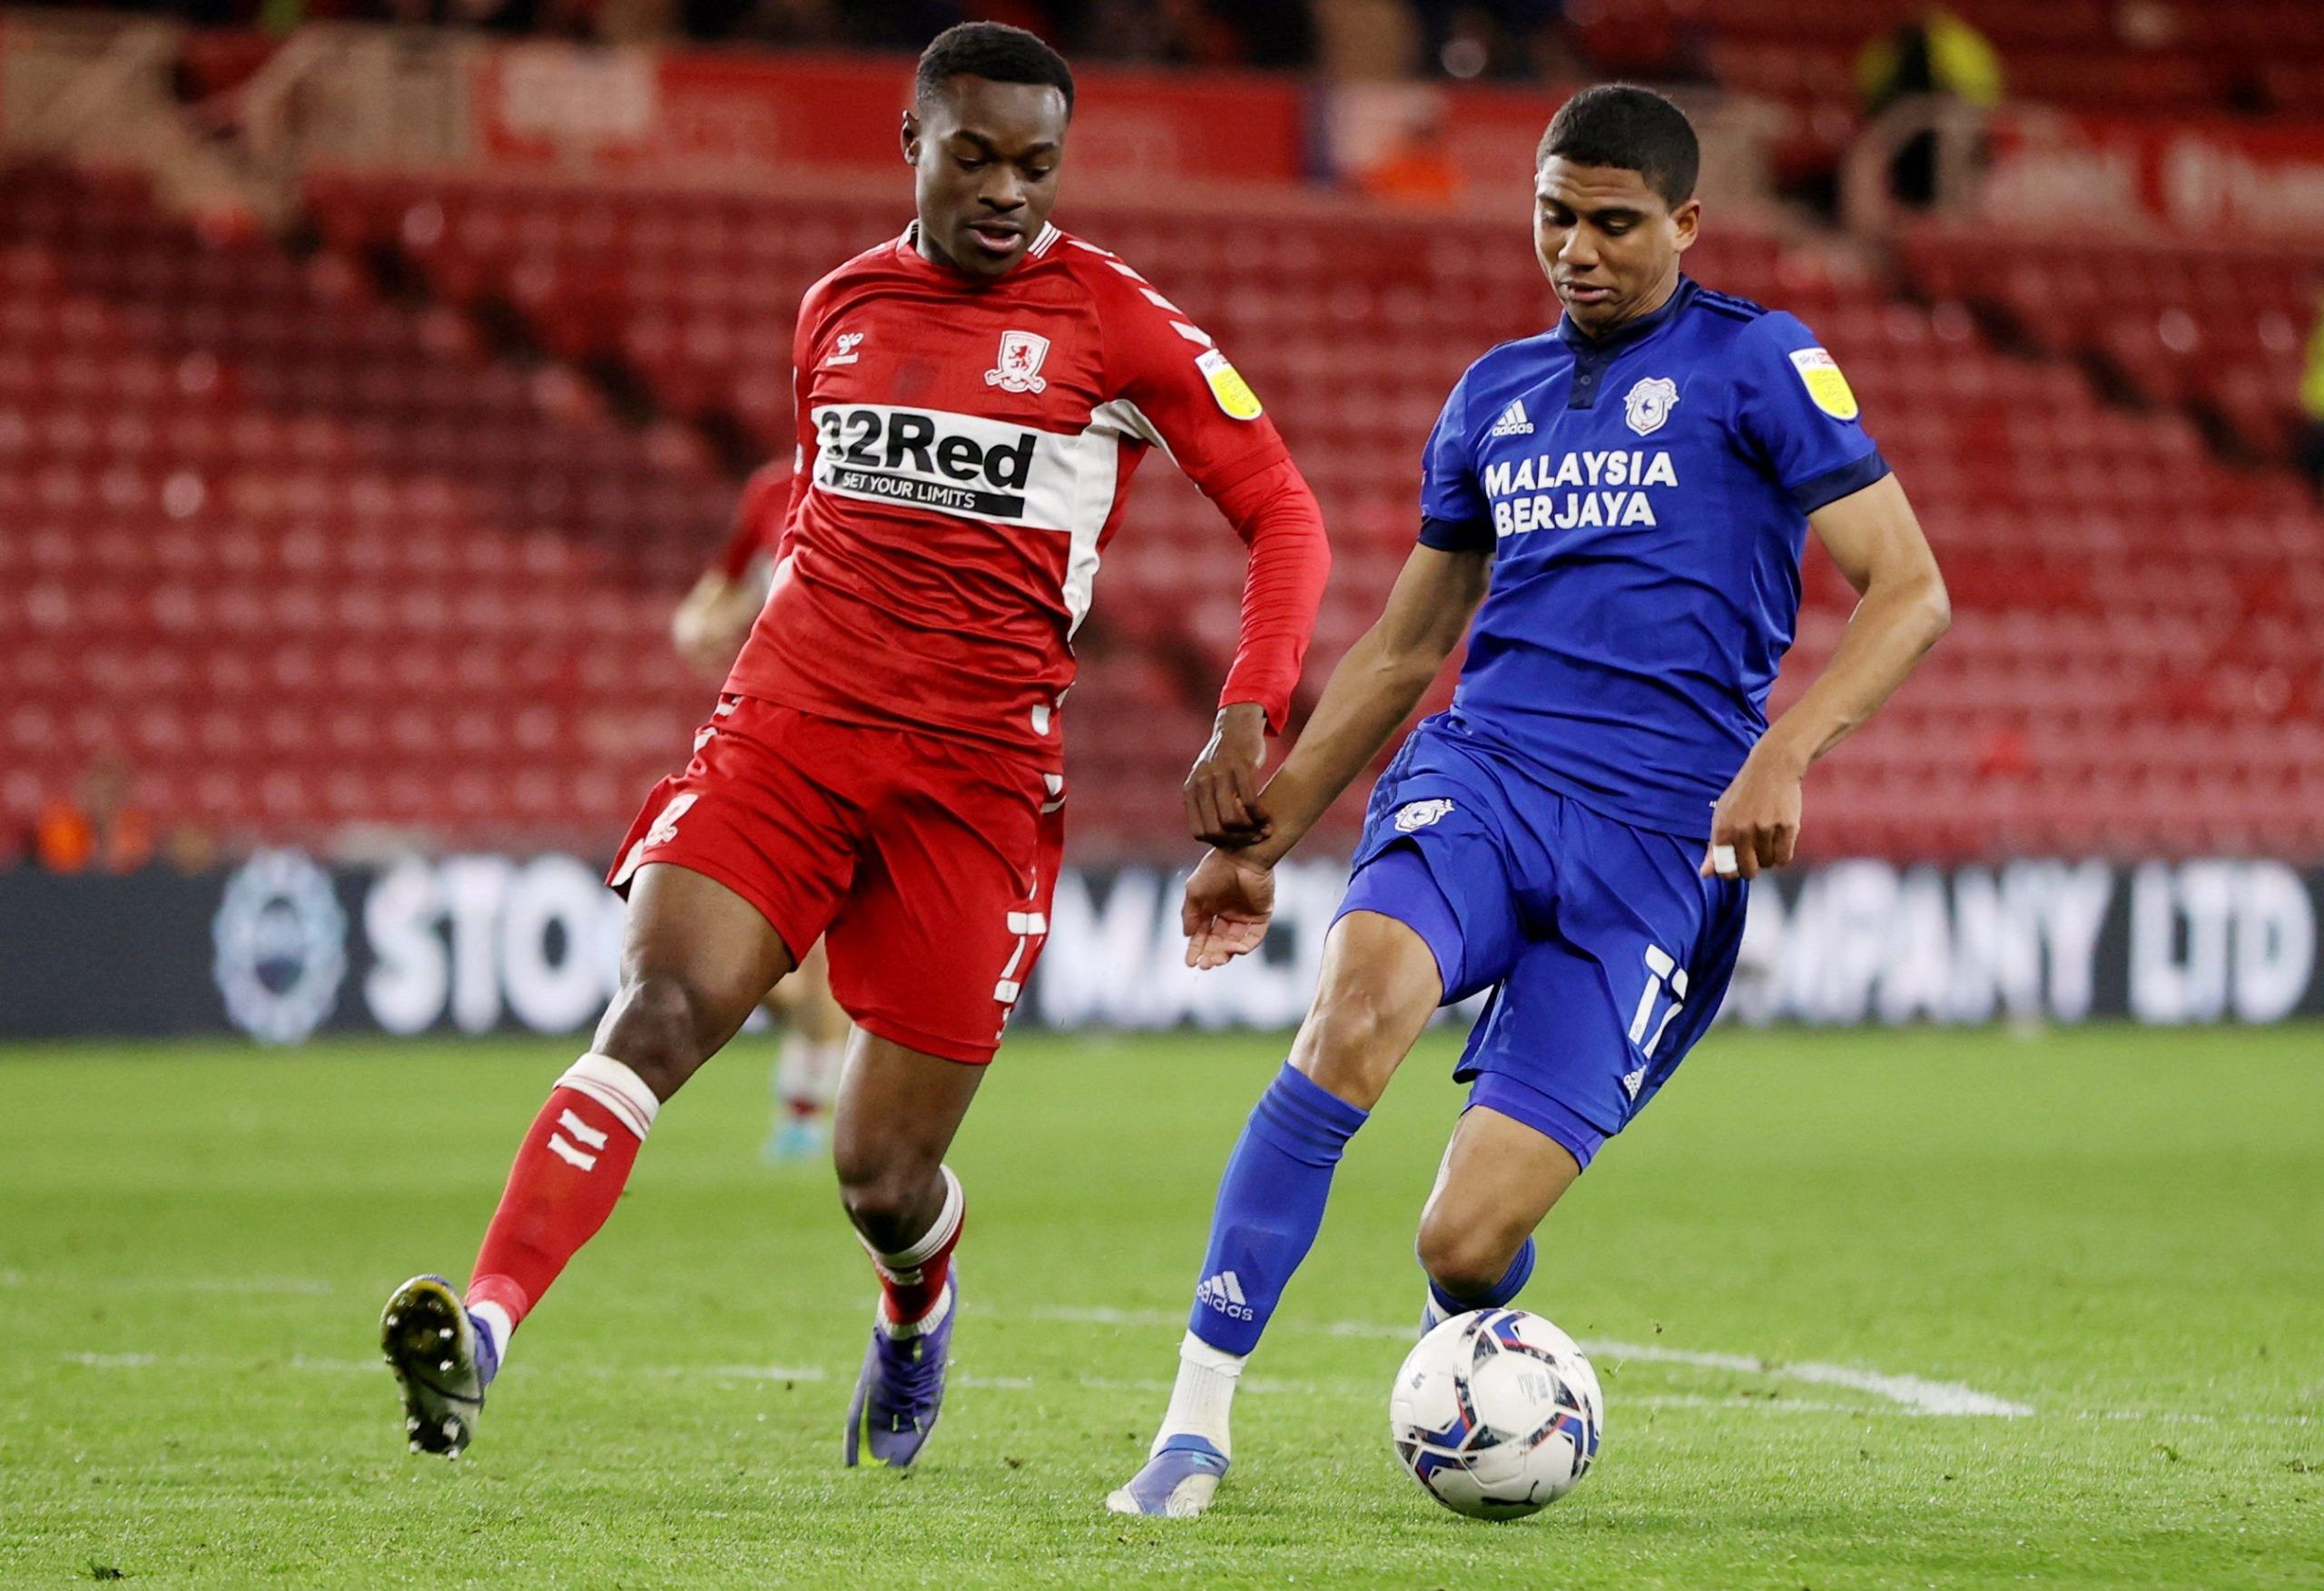 Leeds' Cody Drameh in action for Cardiff City on loan